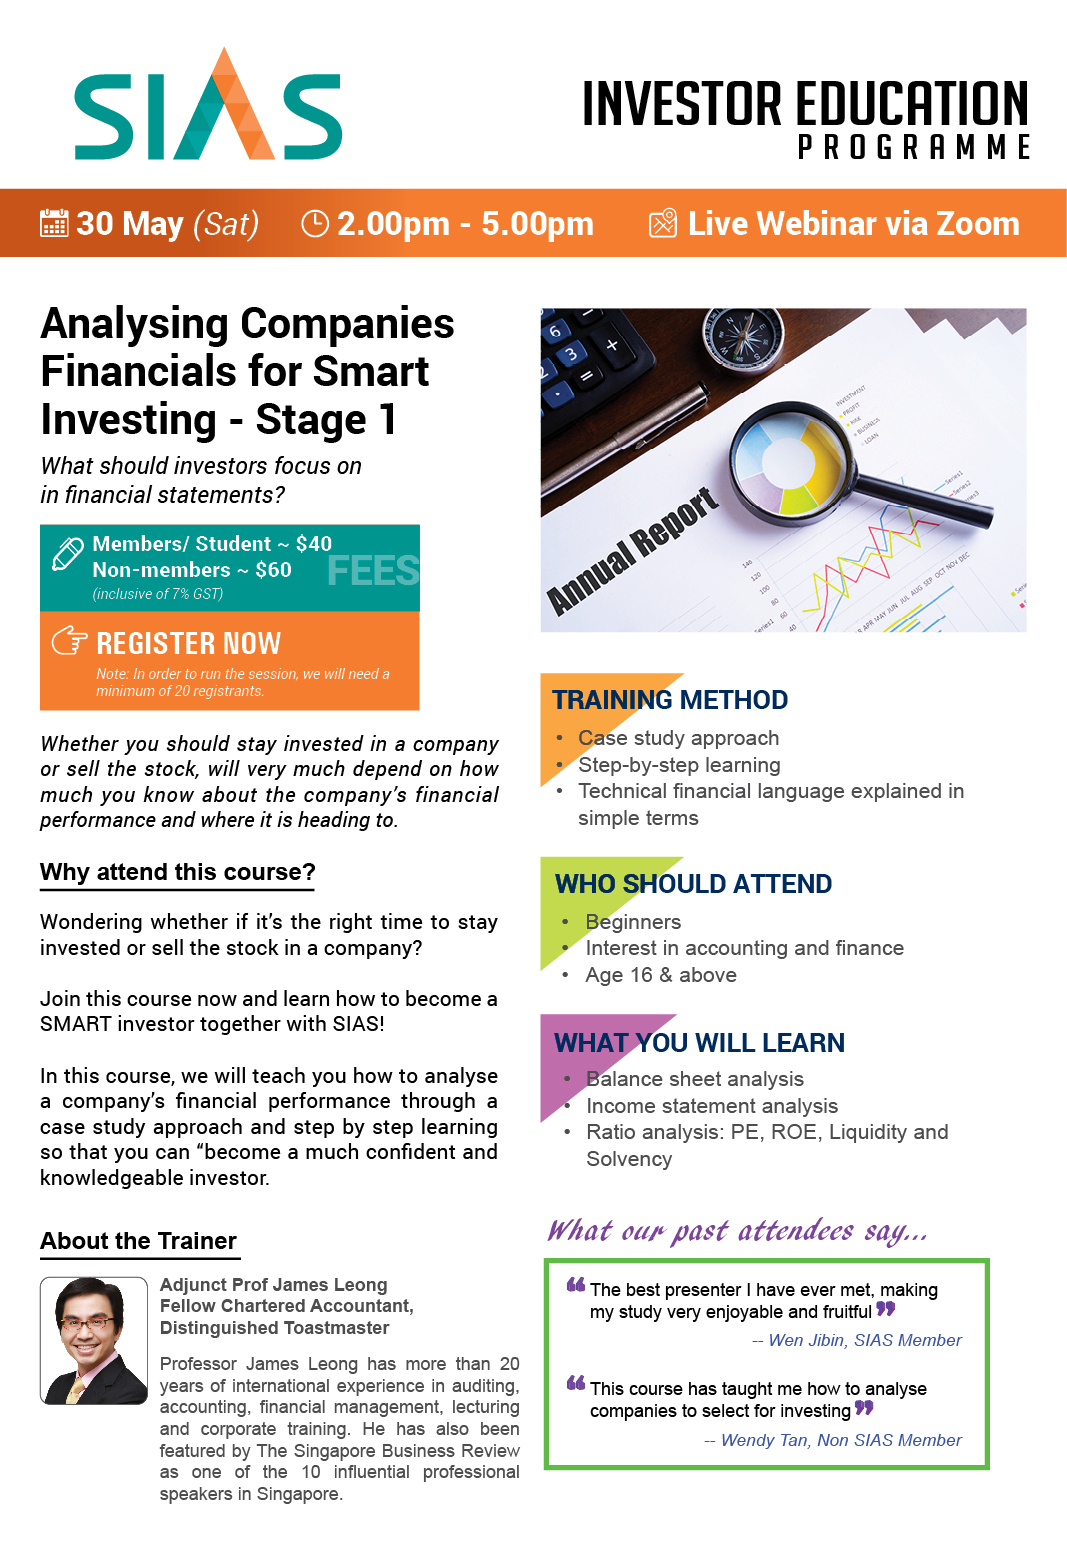 Analysing Companies Financials for Smart Investing - Stage 1